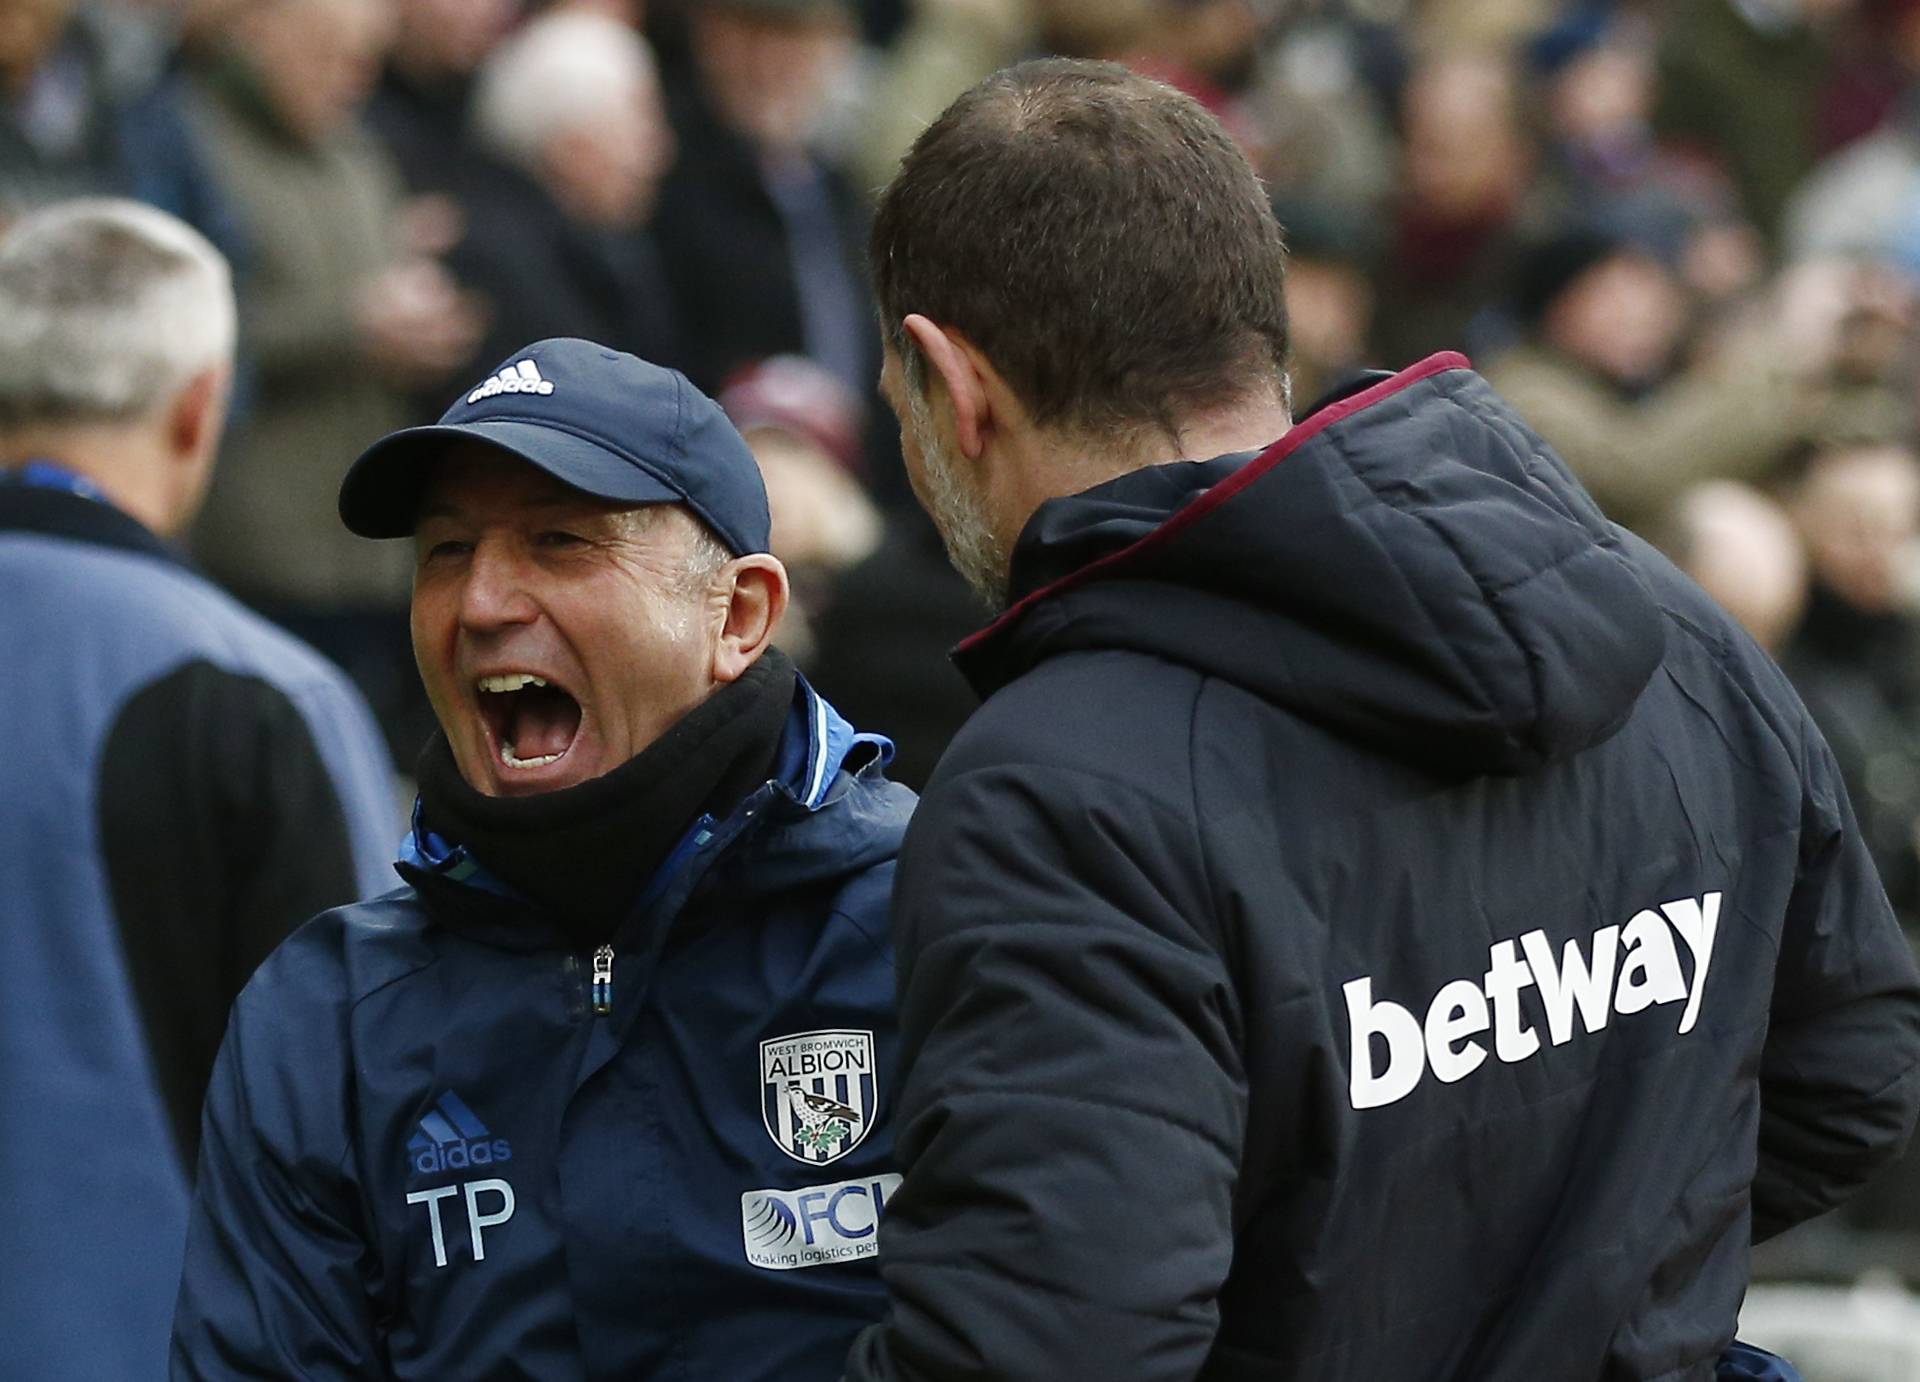 West Ham United manager Slaven Bilic and West Bromwich Albion manager Tony Pulis